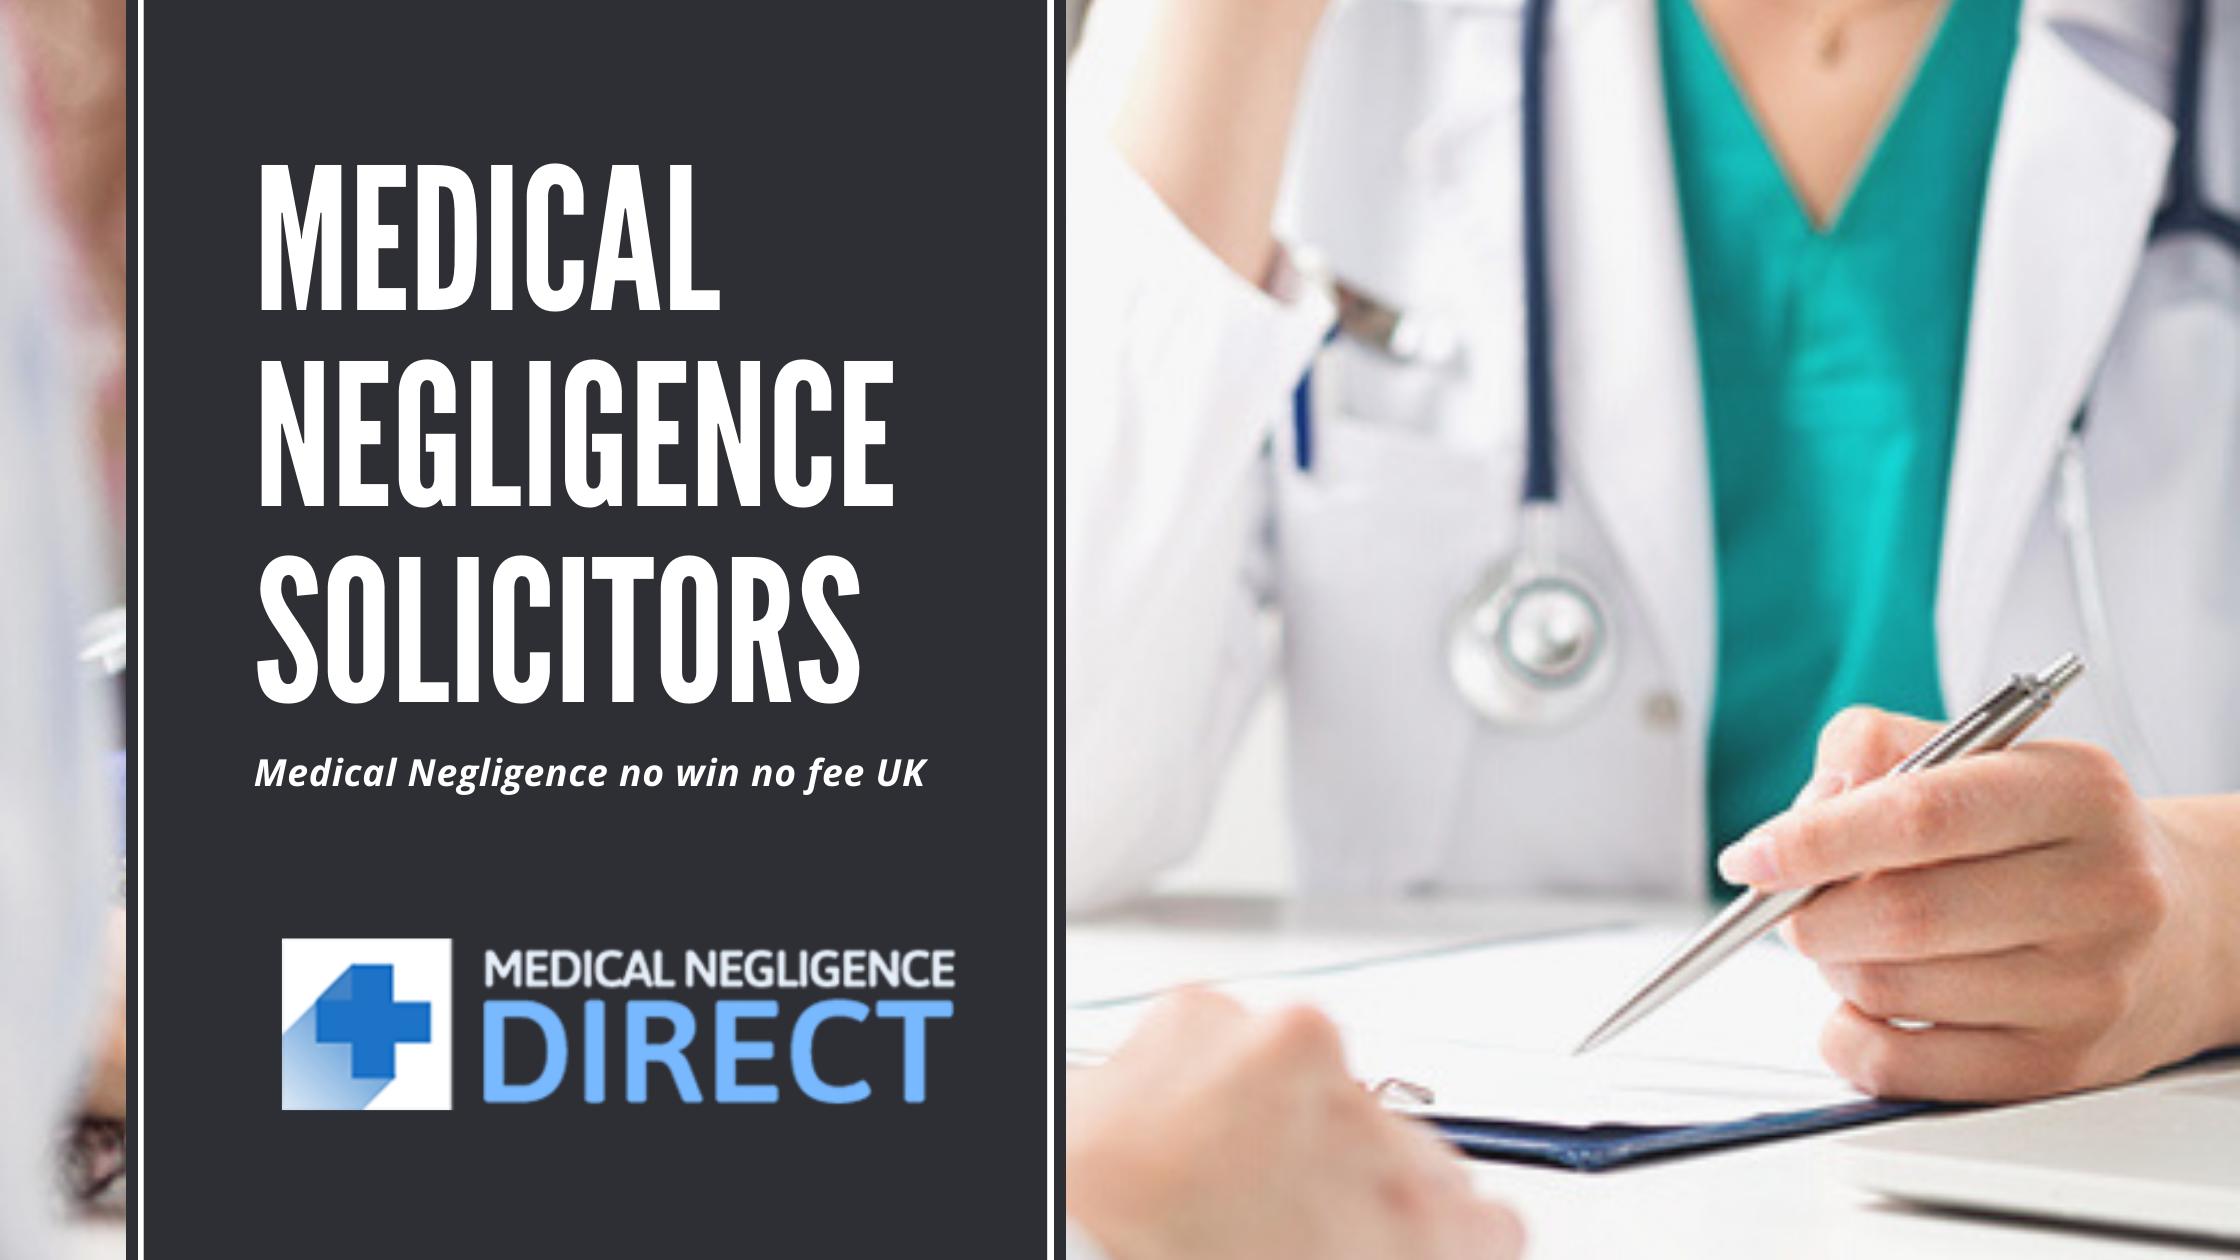 Image - Have you suffered from #nhsnegligence, then you must a #medicalnegligenceclaims against Medical Healthcare. S...